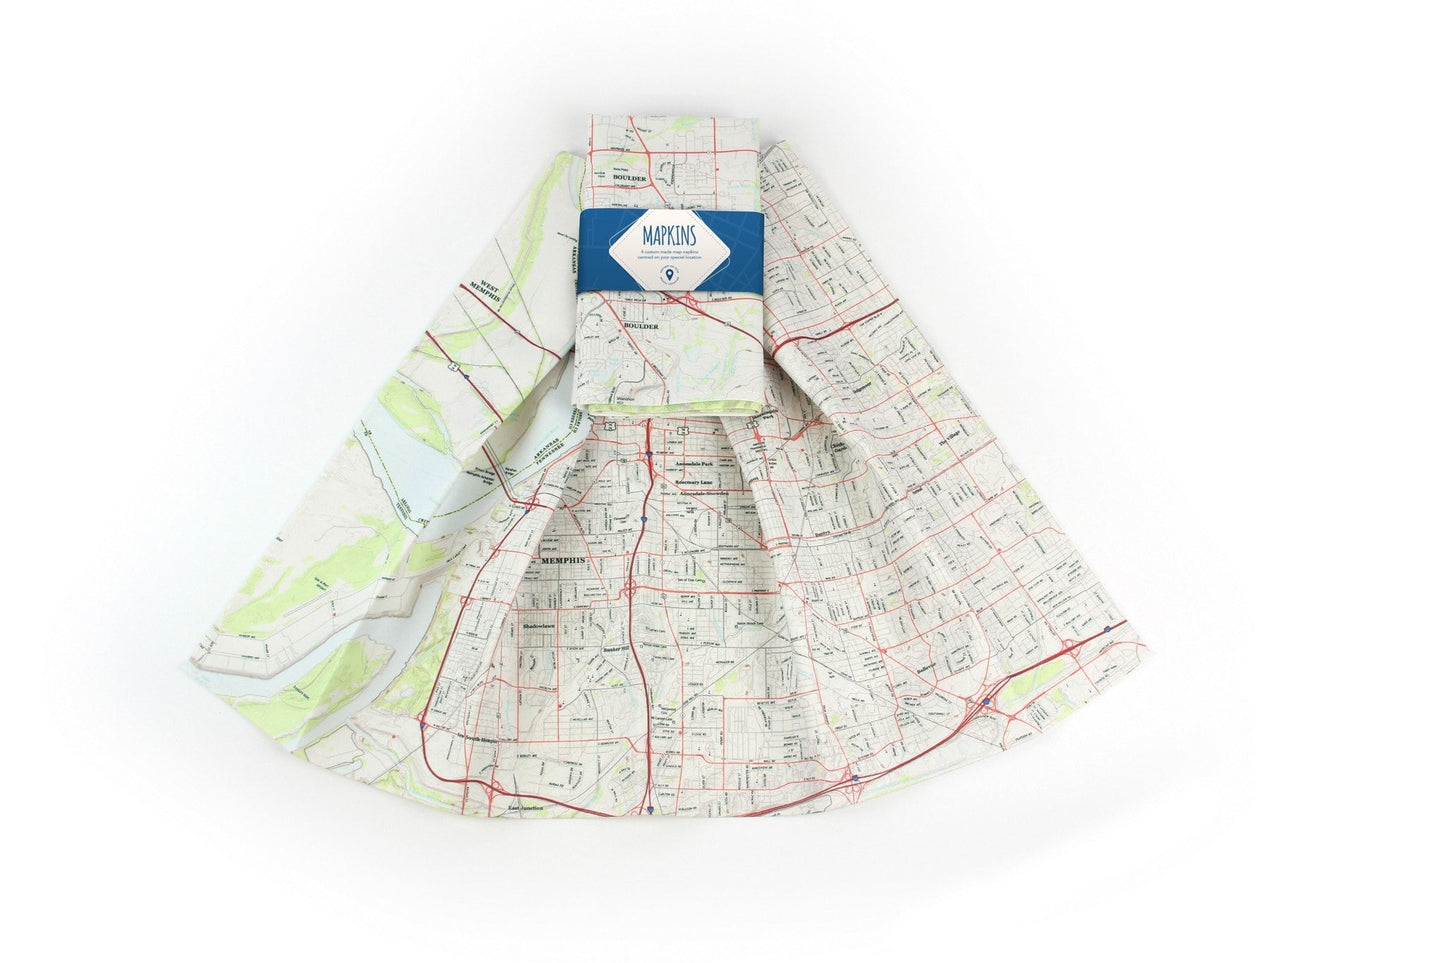 US Map Gift - Personalized Kitchen Towel - US